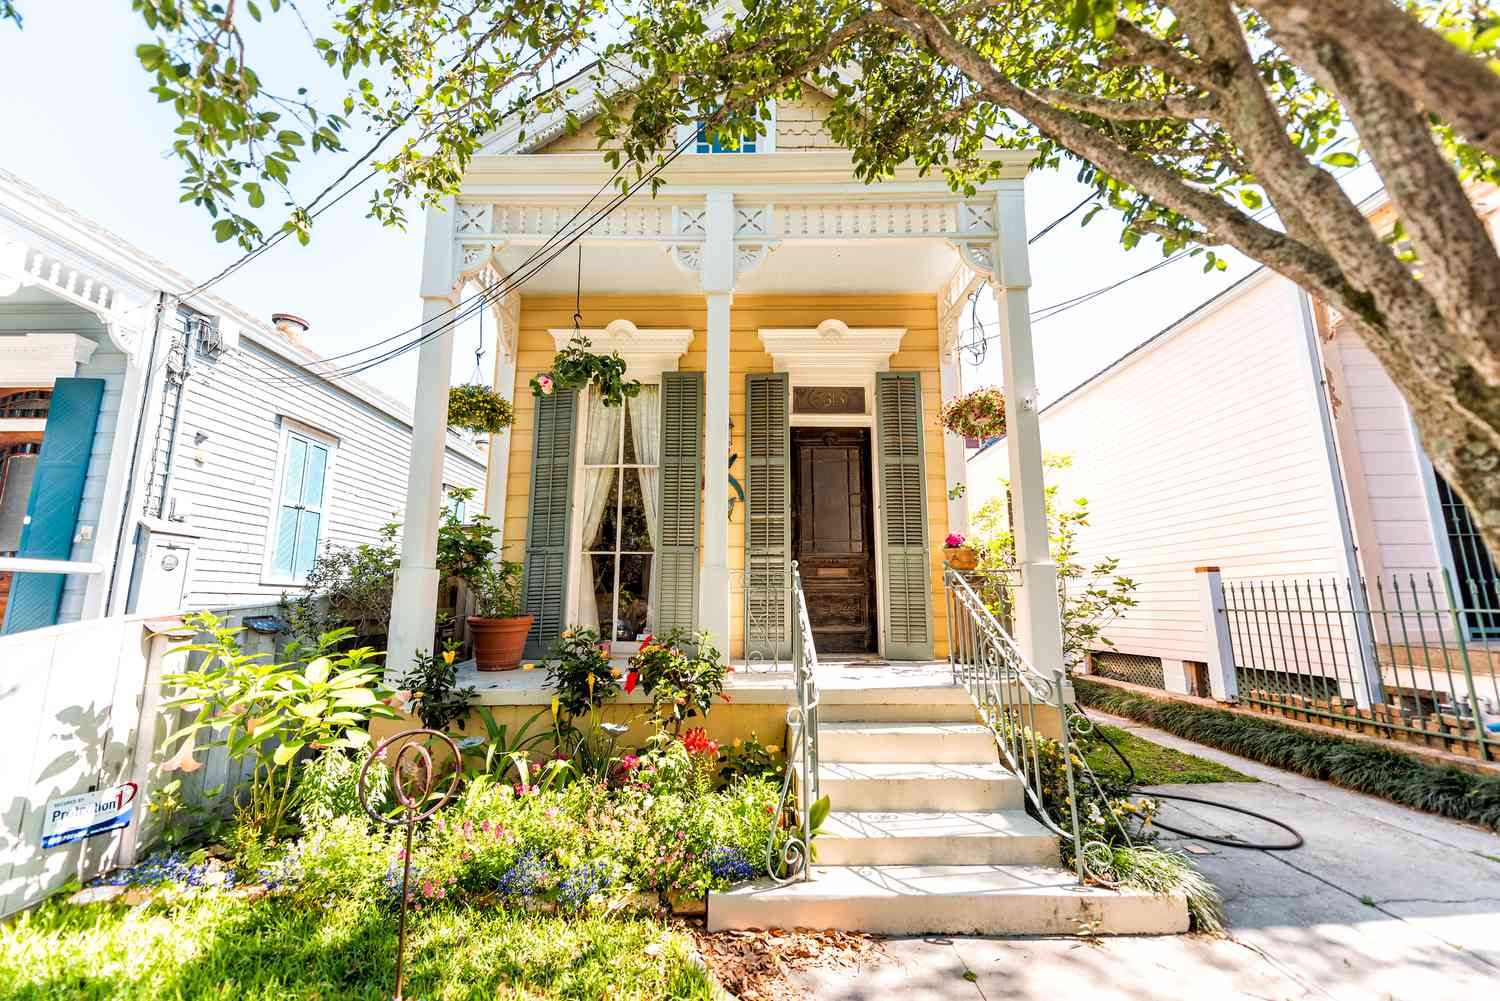 Small Greek Revival cottage in New Orleans.